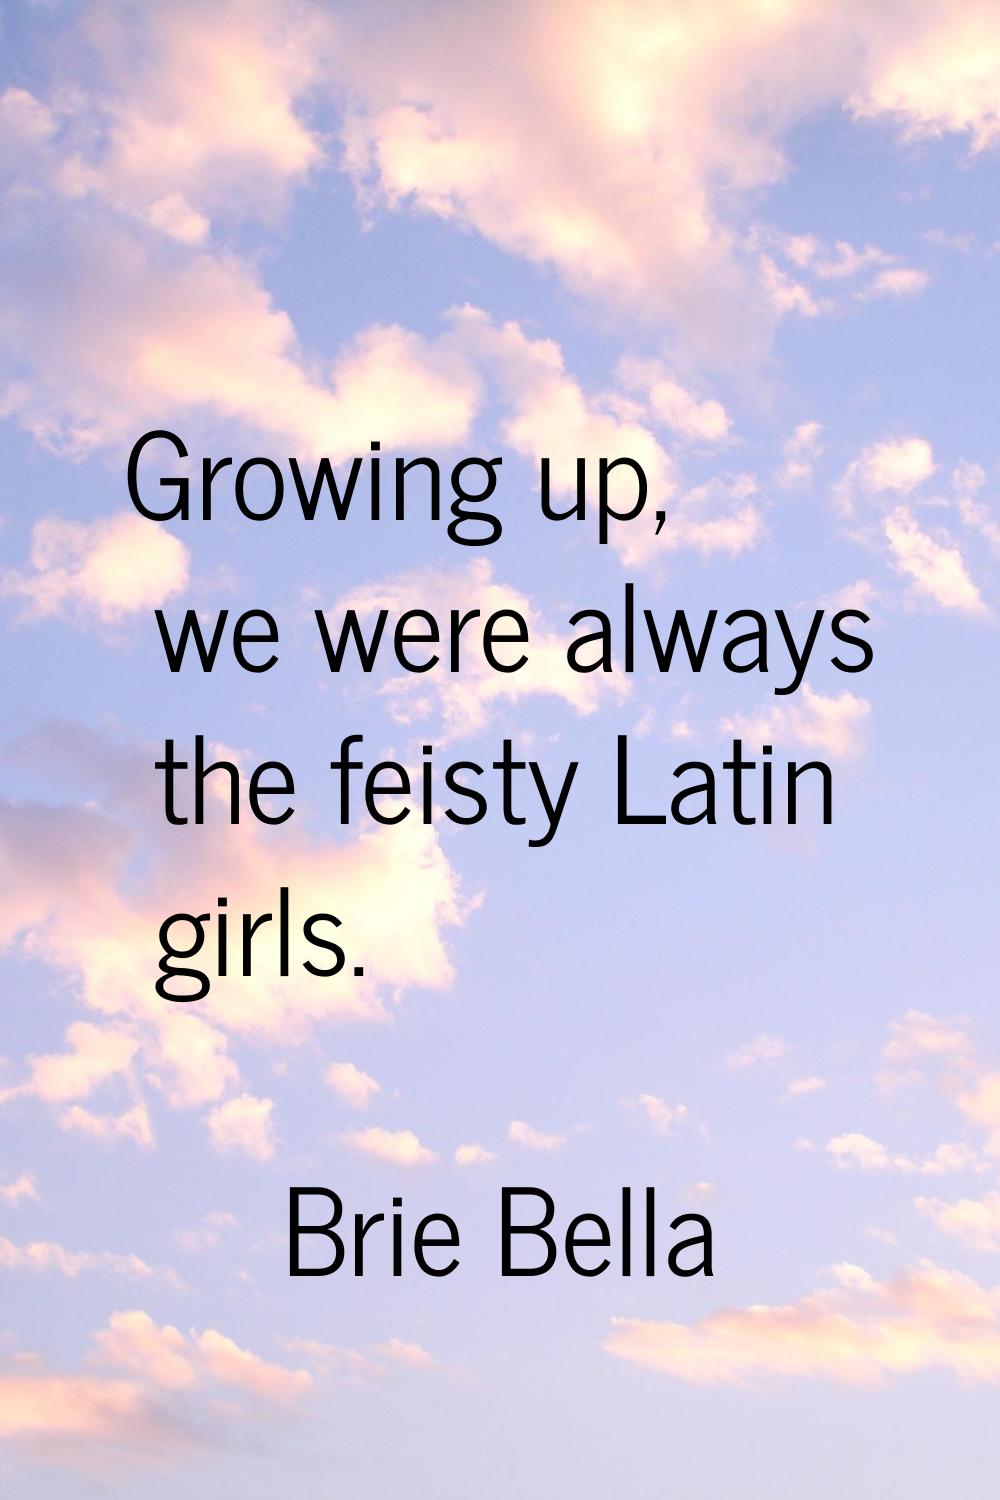 Growing up, we were always the feisty Latin girls.